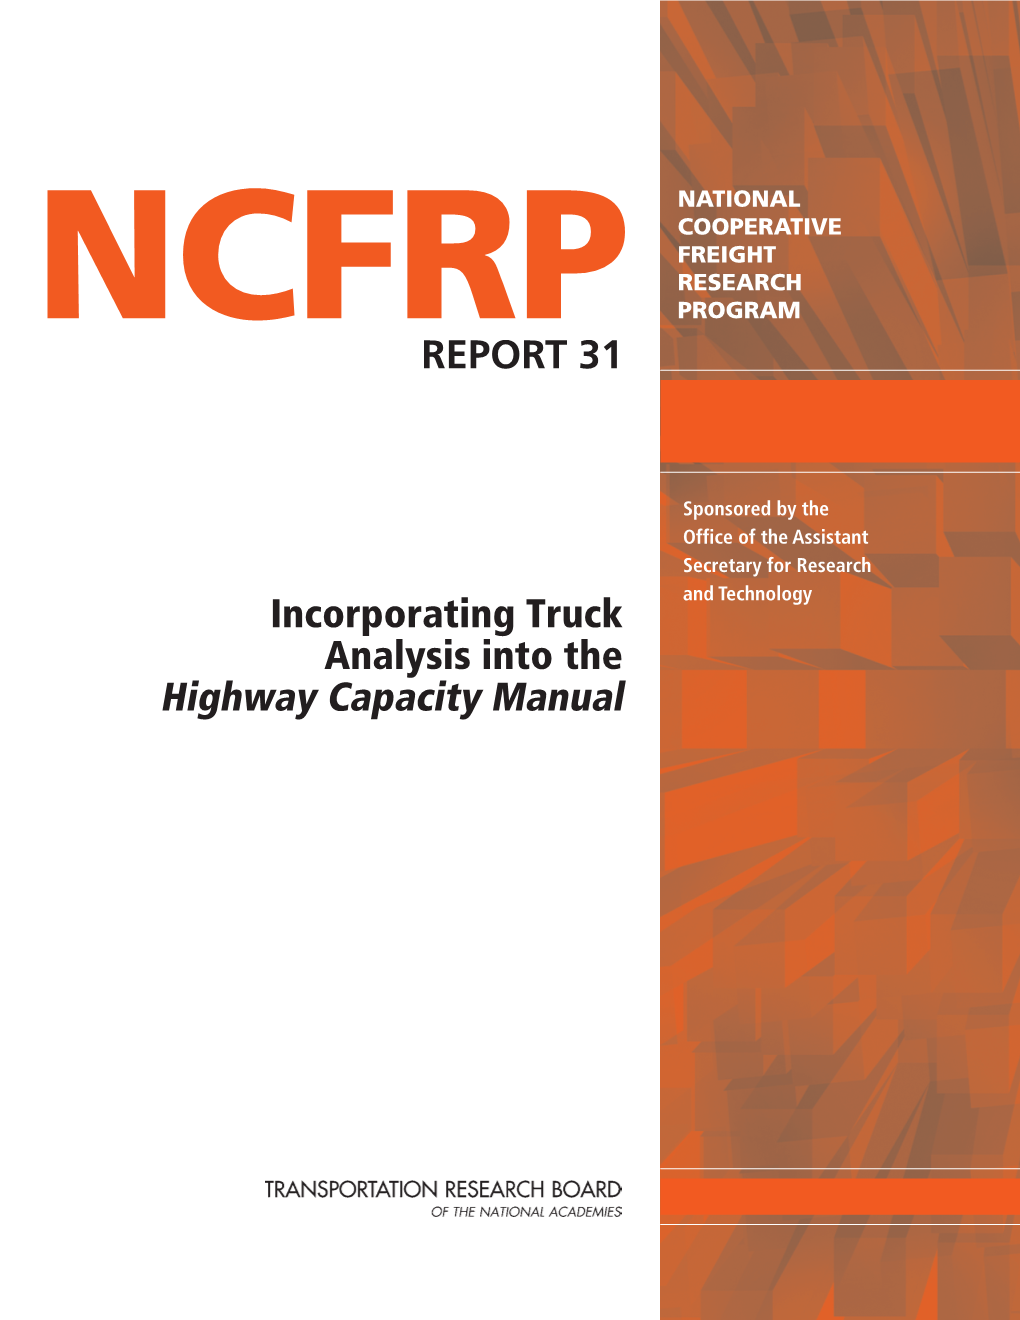 NCFRP Report 31 – Incorporating Truck Analysis Into the Highway Capacity Manual